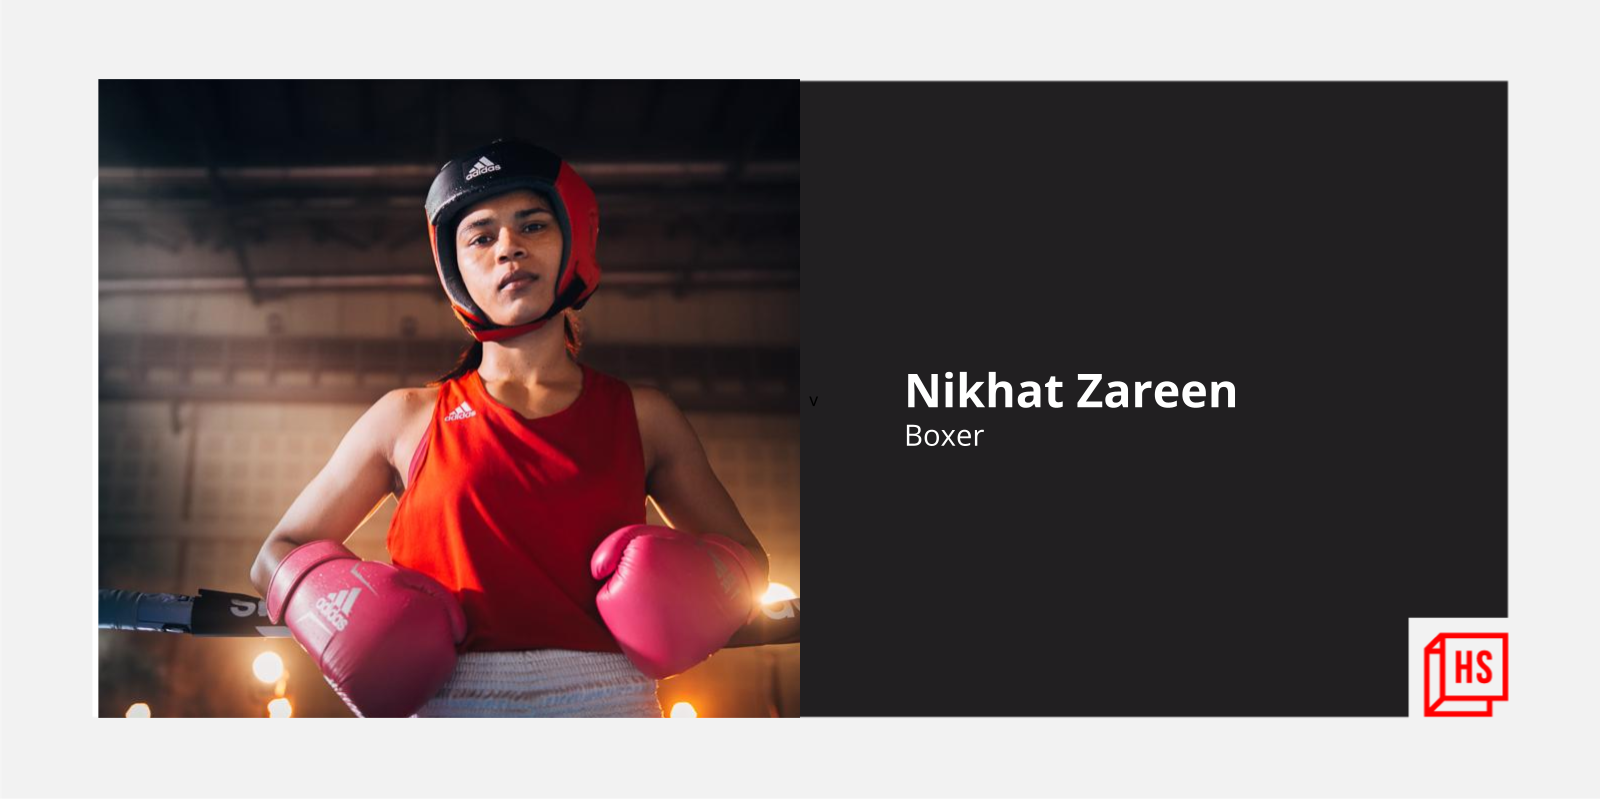 8 lesser known facts about Nikhat Zareen, India’s newest world champion boxer